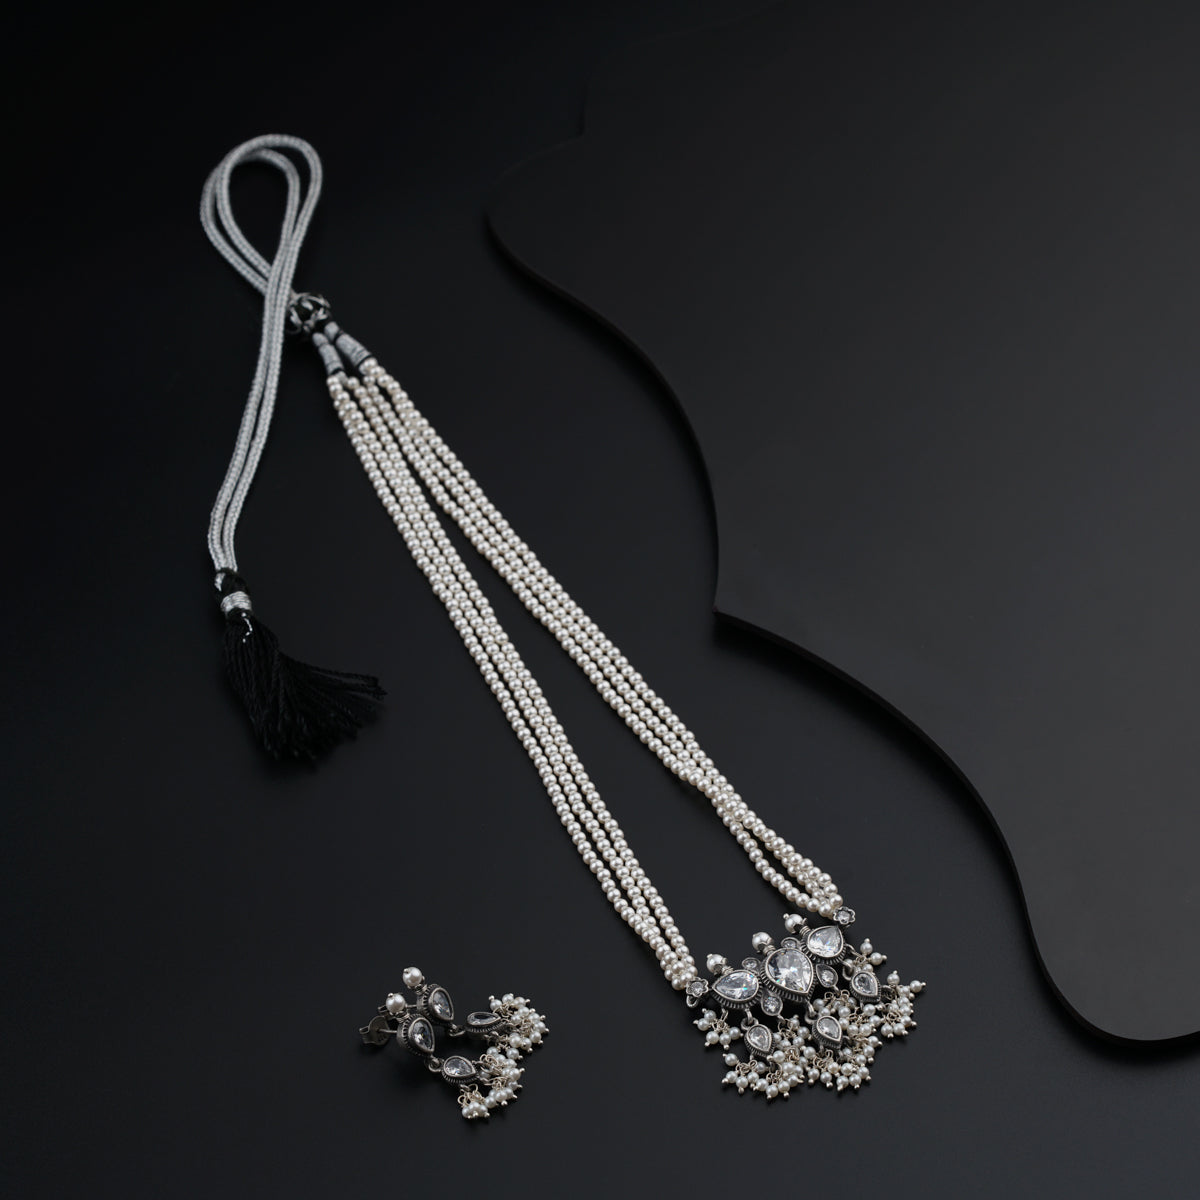 a pair of pearls and tassels on a black surface